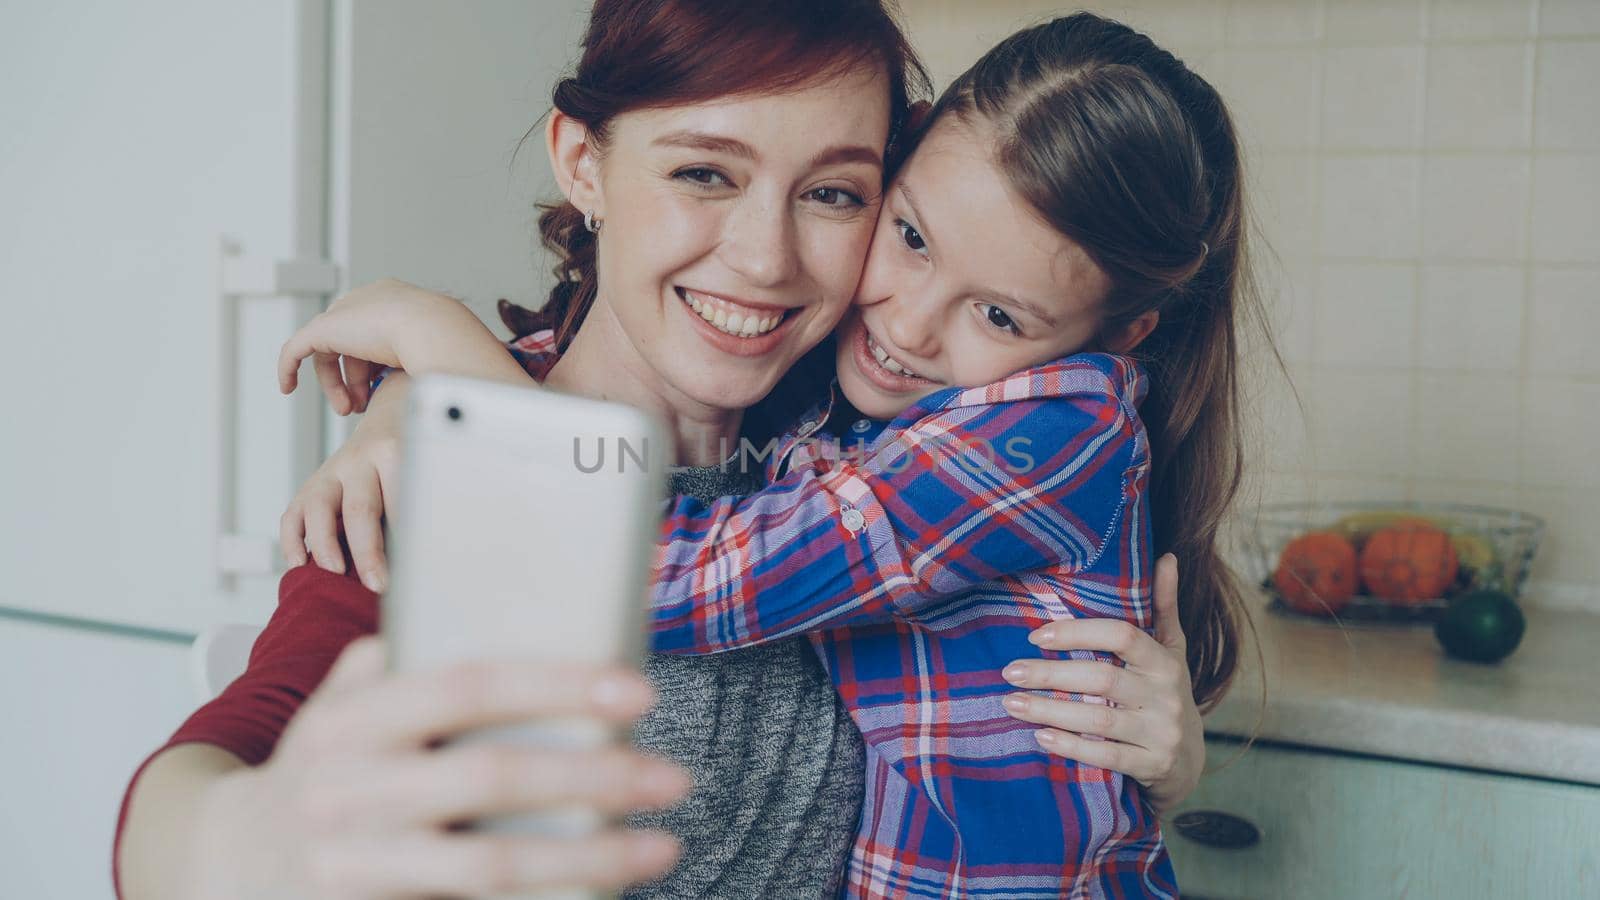 Smiling mother together with young funny playful daughter making selfie photo with smartphone camera at home in kitchen. Family, cook, and people concept by silverkblack